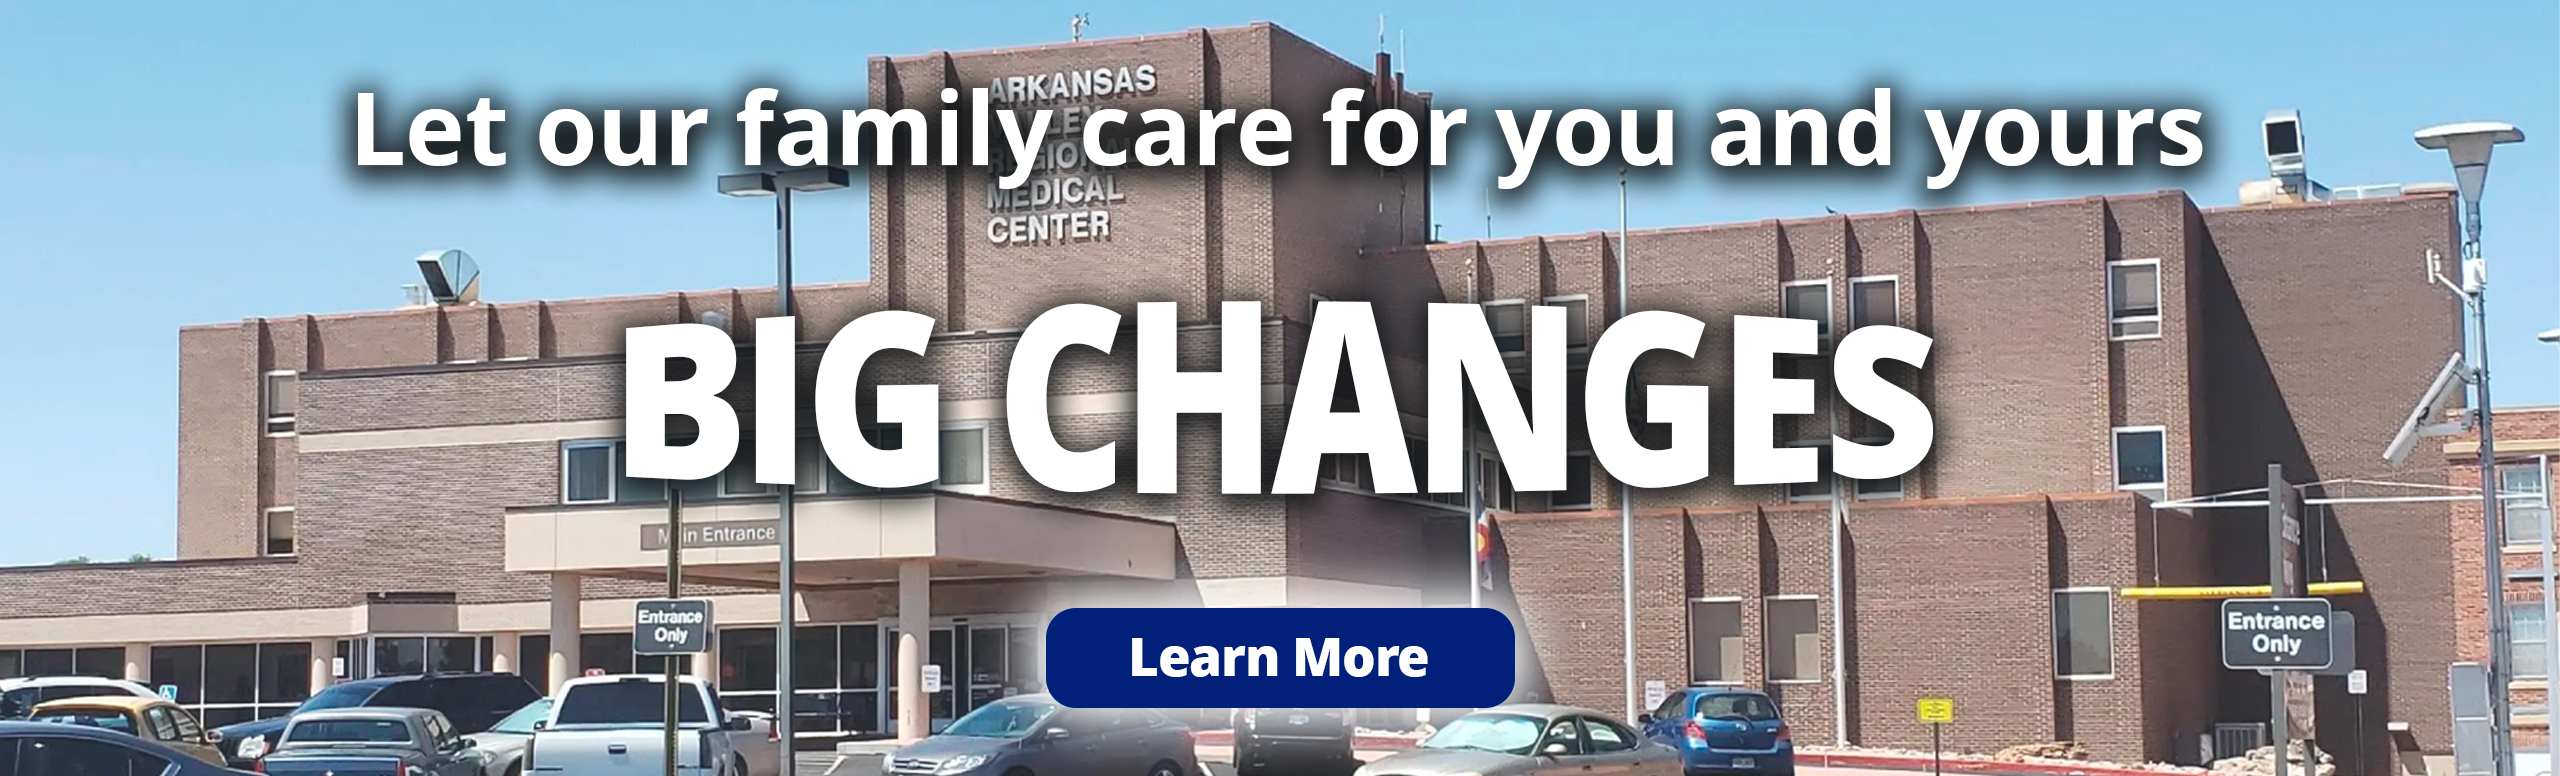 Let our family care for you and yours

Big Changes 

Learn More by clicking here